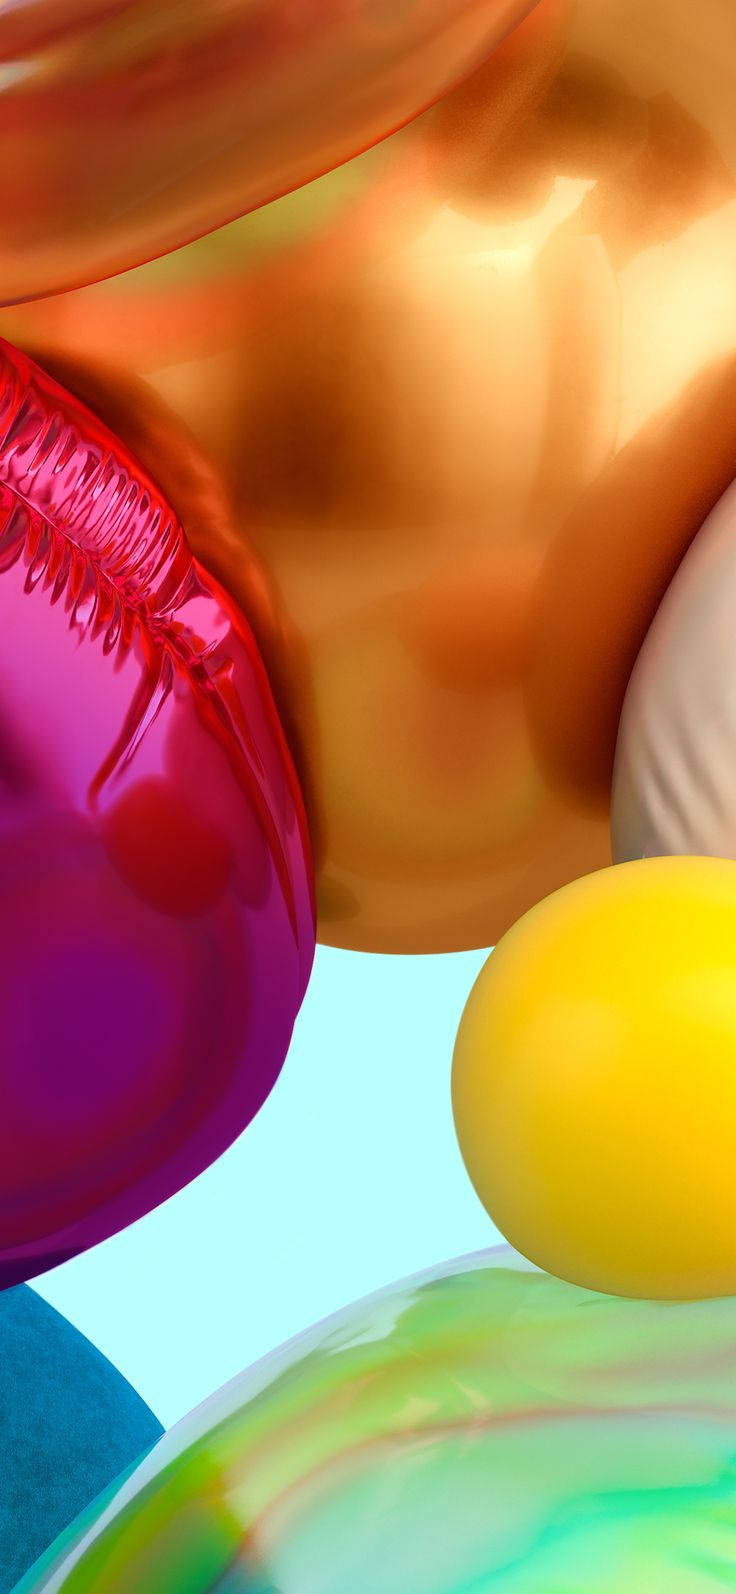 Samsung A71 Displaying A Captivating Wallpaper Of Multicolored Balloons